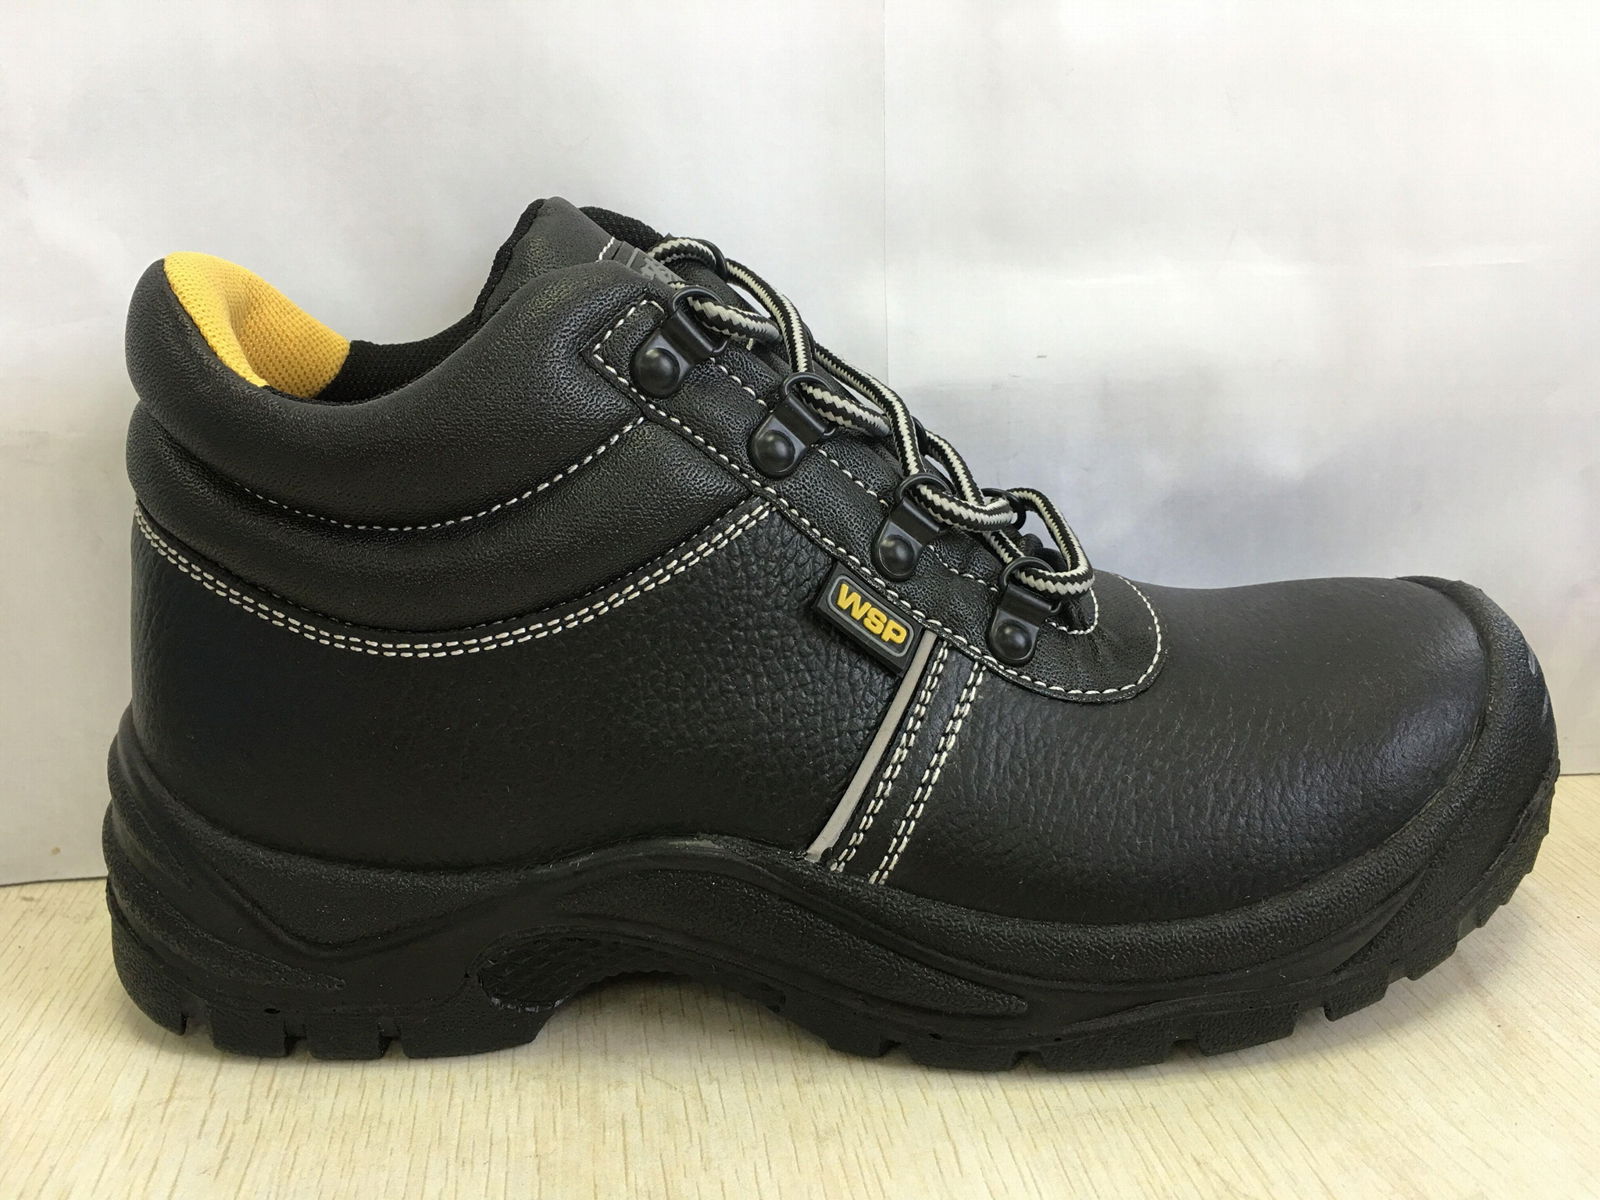 SHOES (China Manufacturer) - Work & Safety Shoes - Shoes Products ...